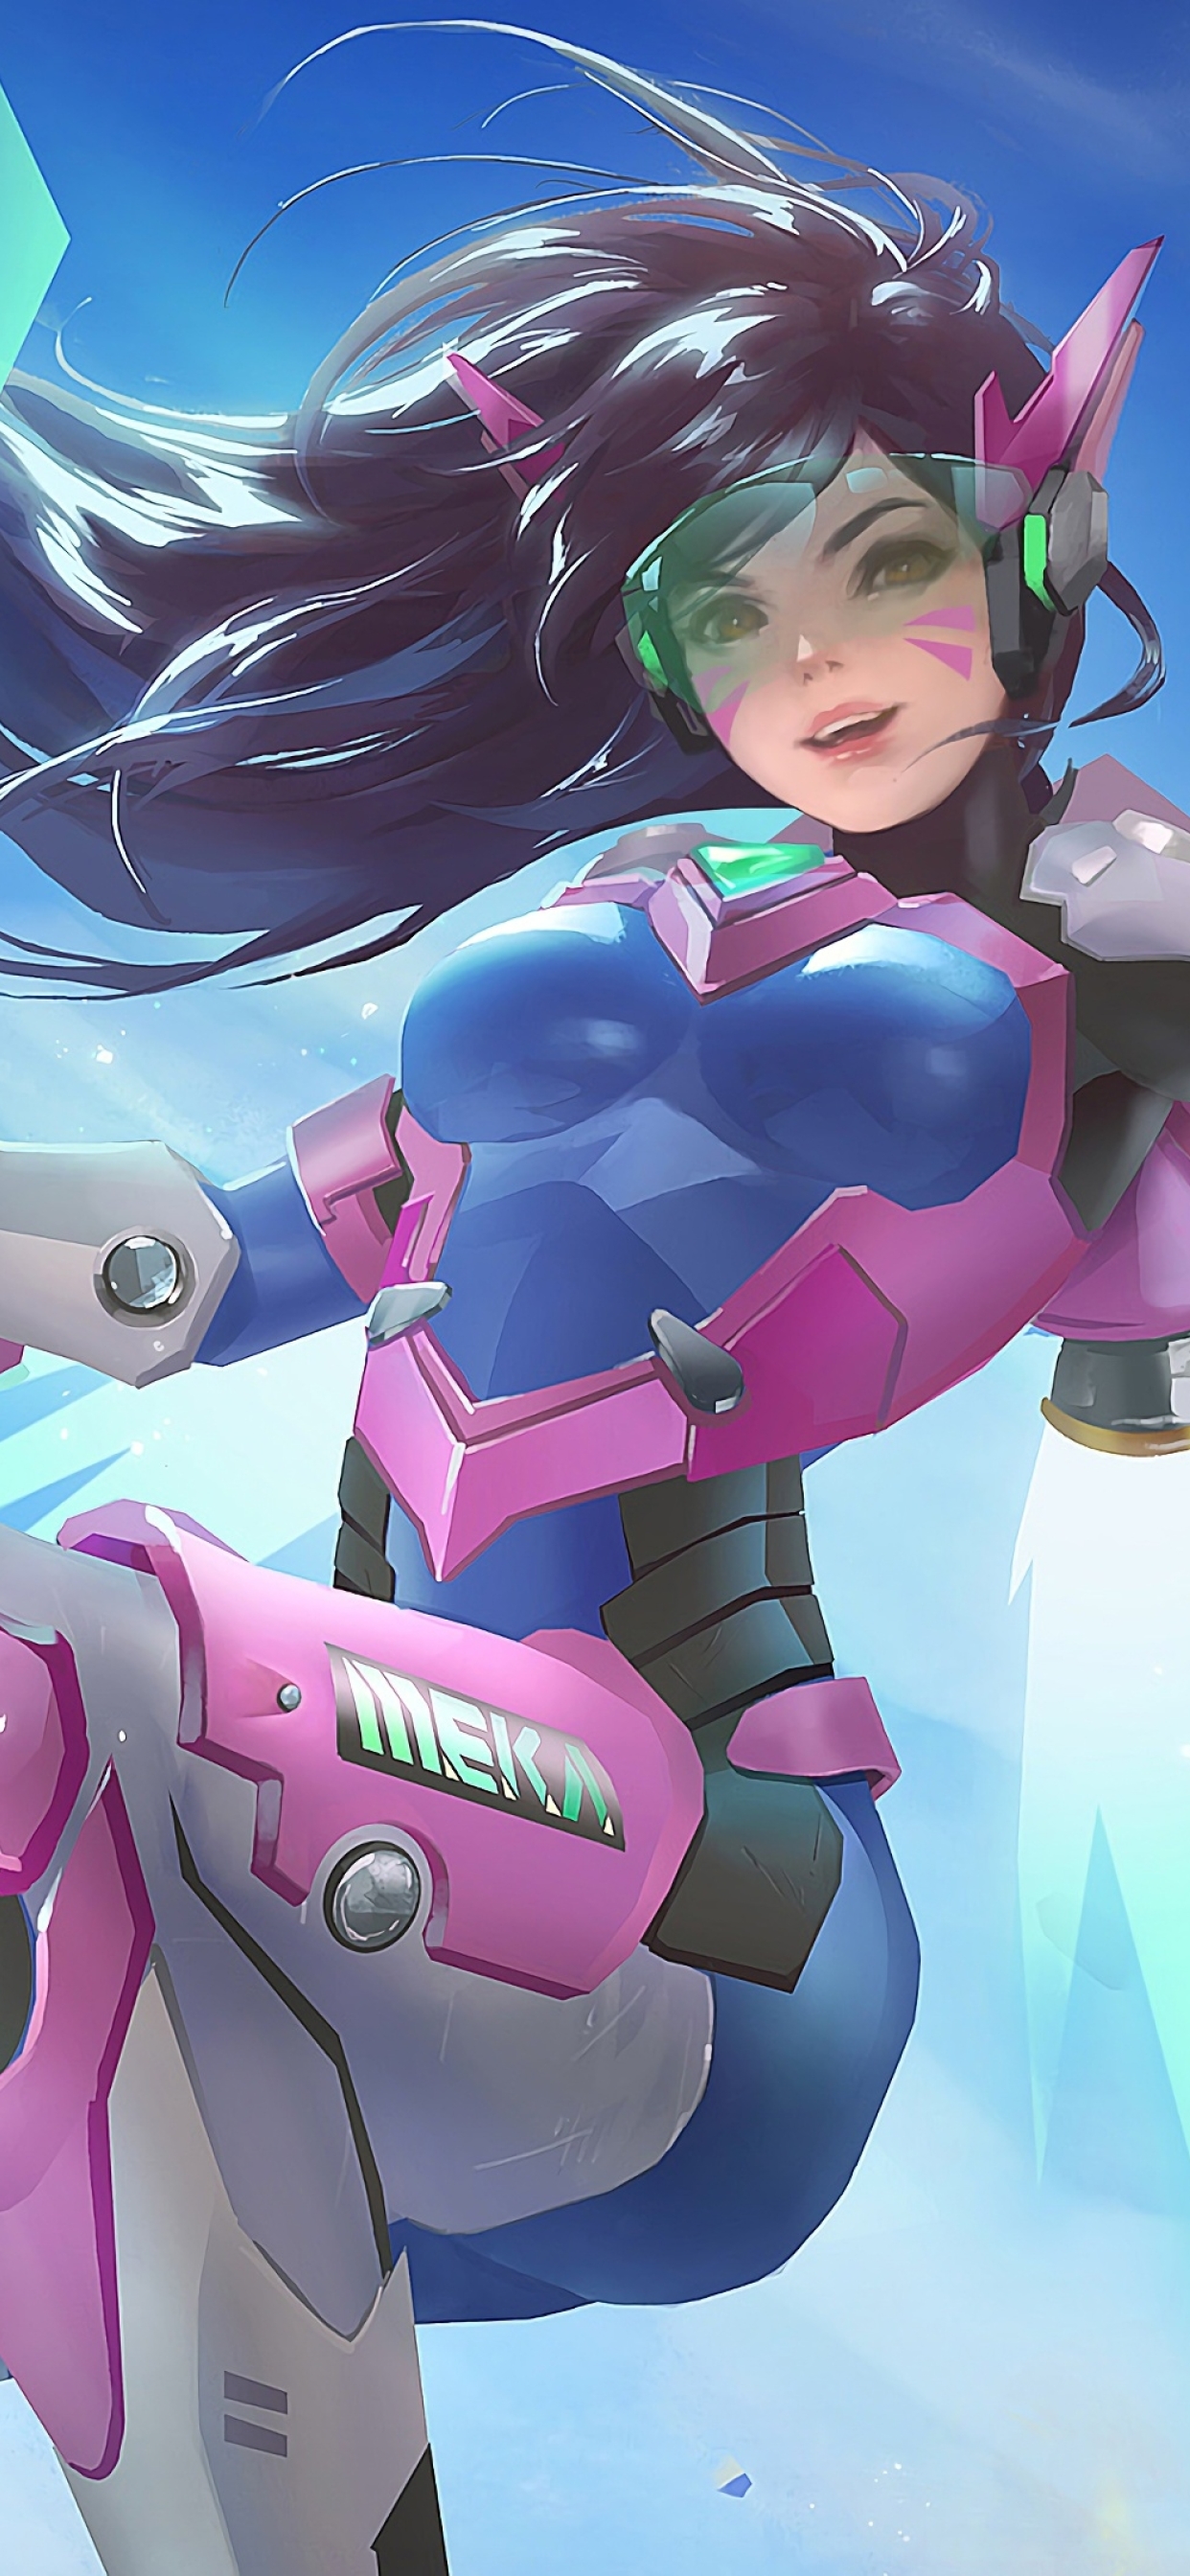 1242x26 D Va Overwatch Game Iphone Xs Max Wallpaper Hd Games 4k Wallpapers Images Photos And Background